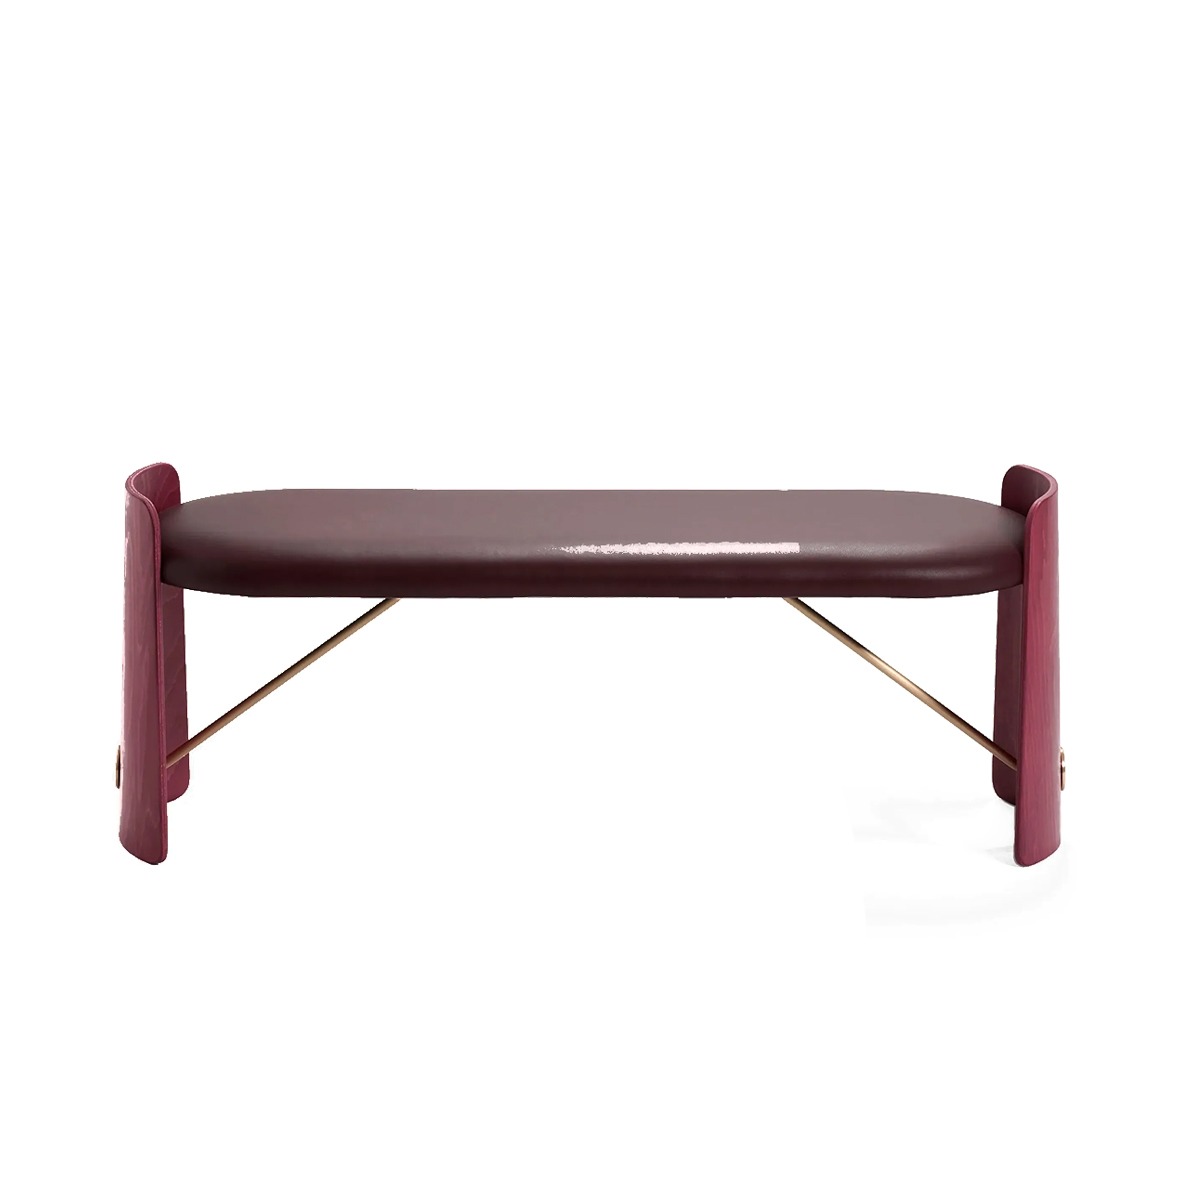 DANTE - Goods and Bads Biscotto Bench - 3colors